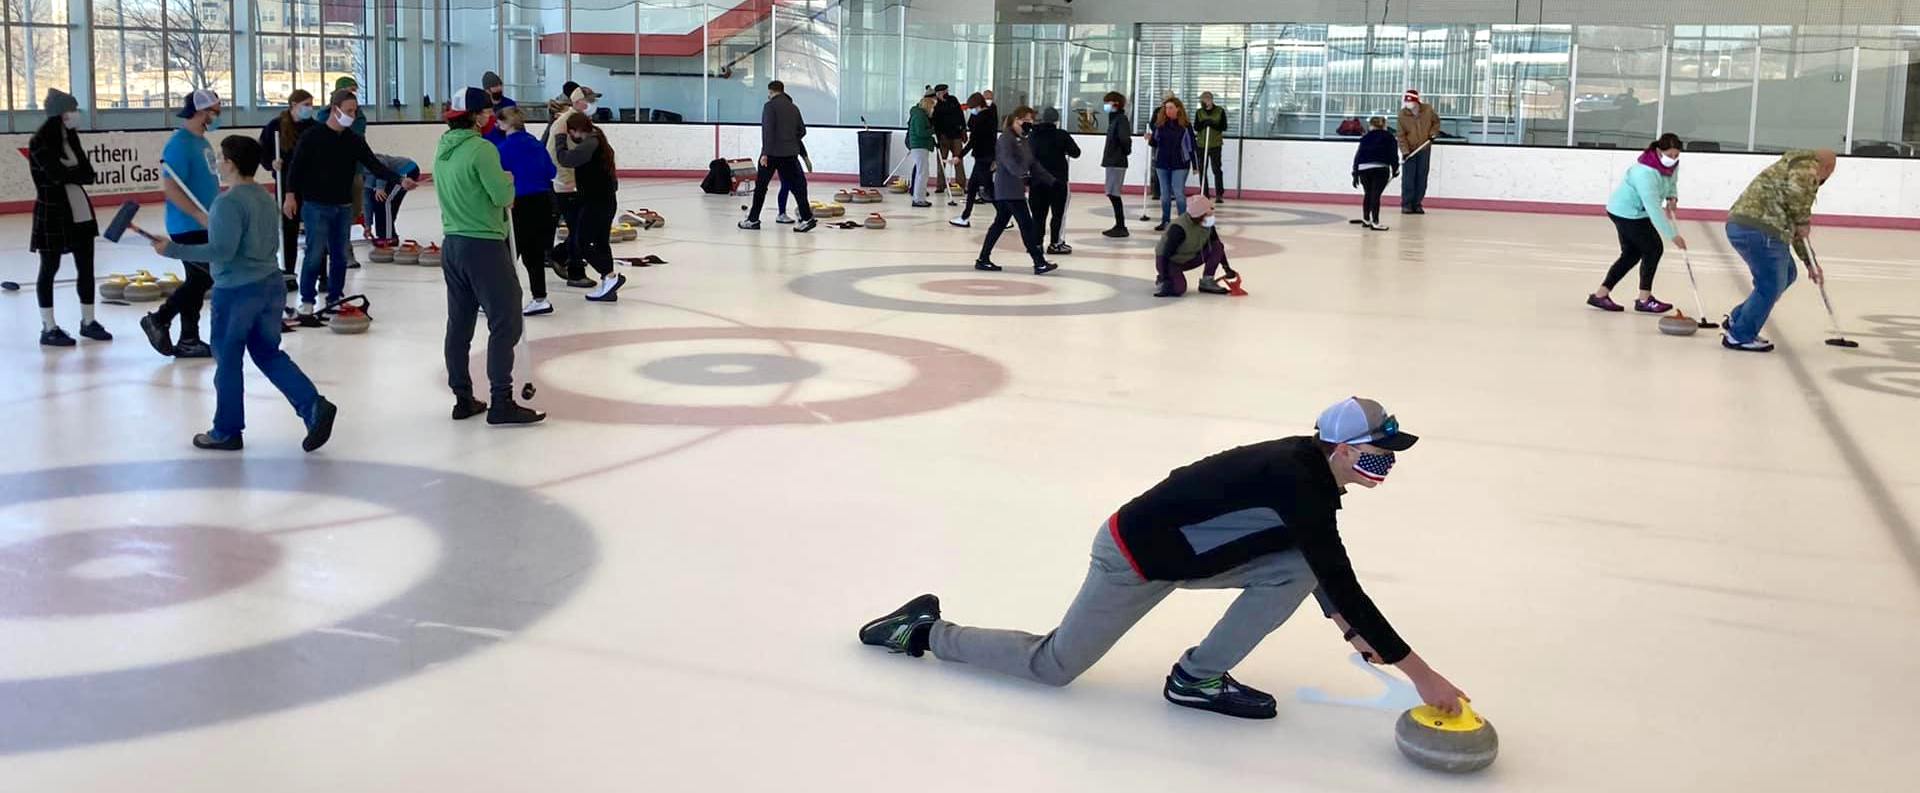 Learn to Curl - Sunday, Nov 20, 2022